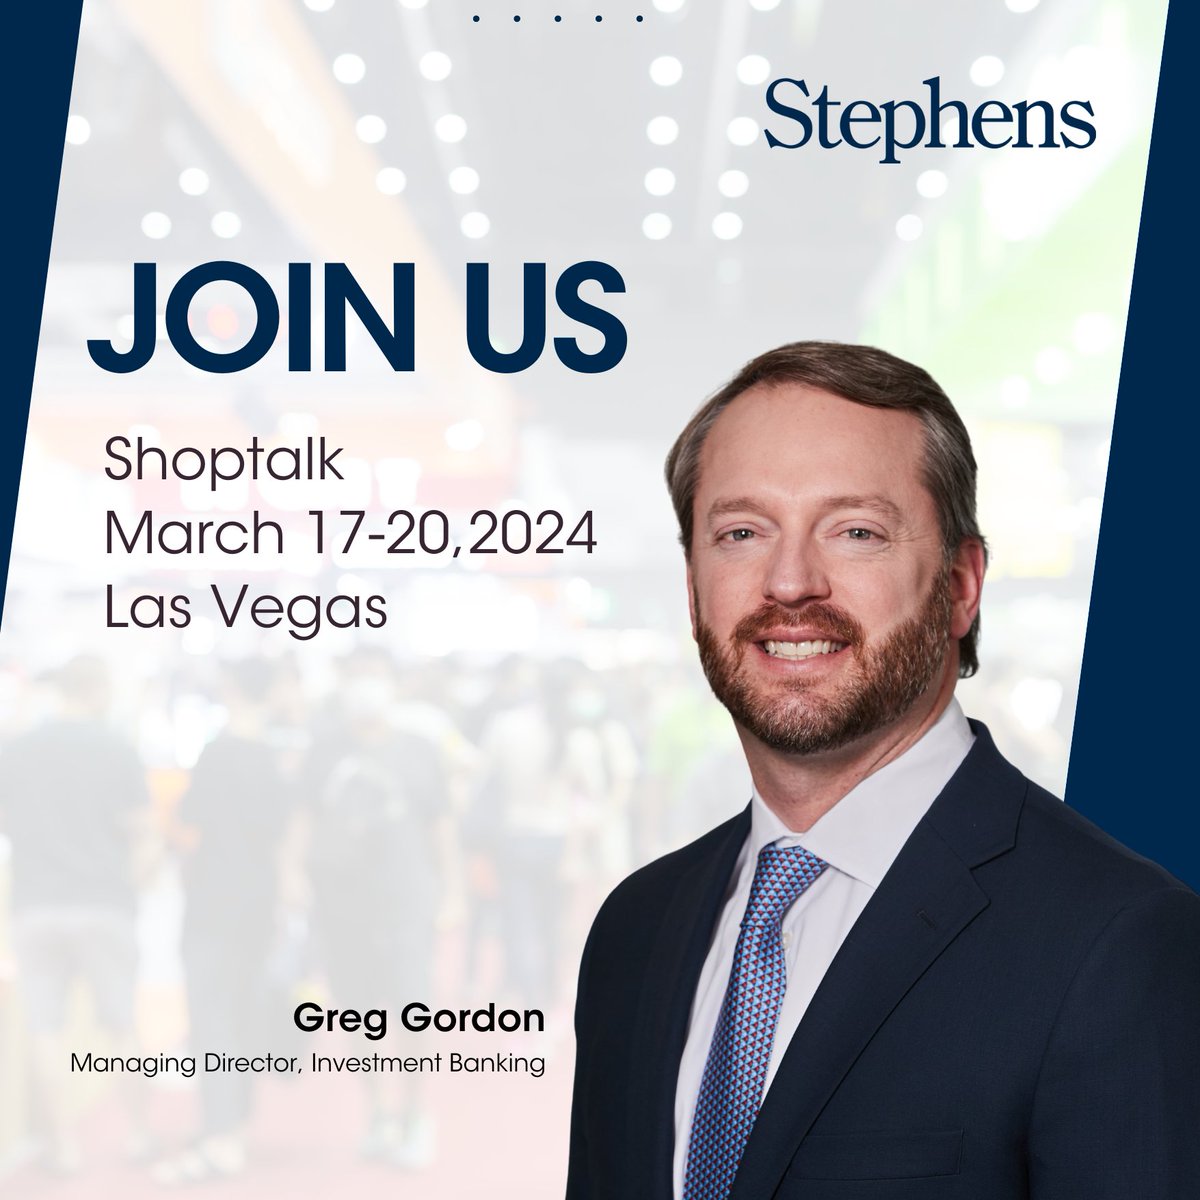 Our team is gearing up for the 2024 Shoptalk conference in Las Vegas this month. We’re excited to connect with industry leaders and expand our network. If you plan on attending, make sure to connect with Managing Director Greg Gordon. stephens.com/investment-ban…